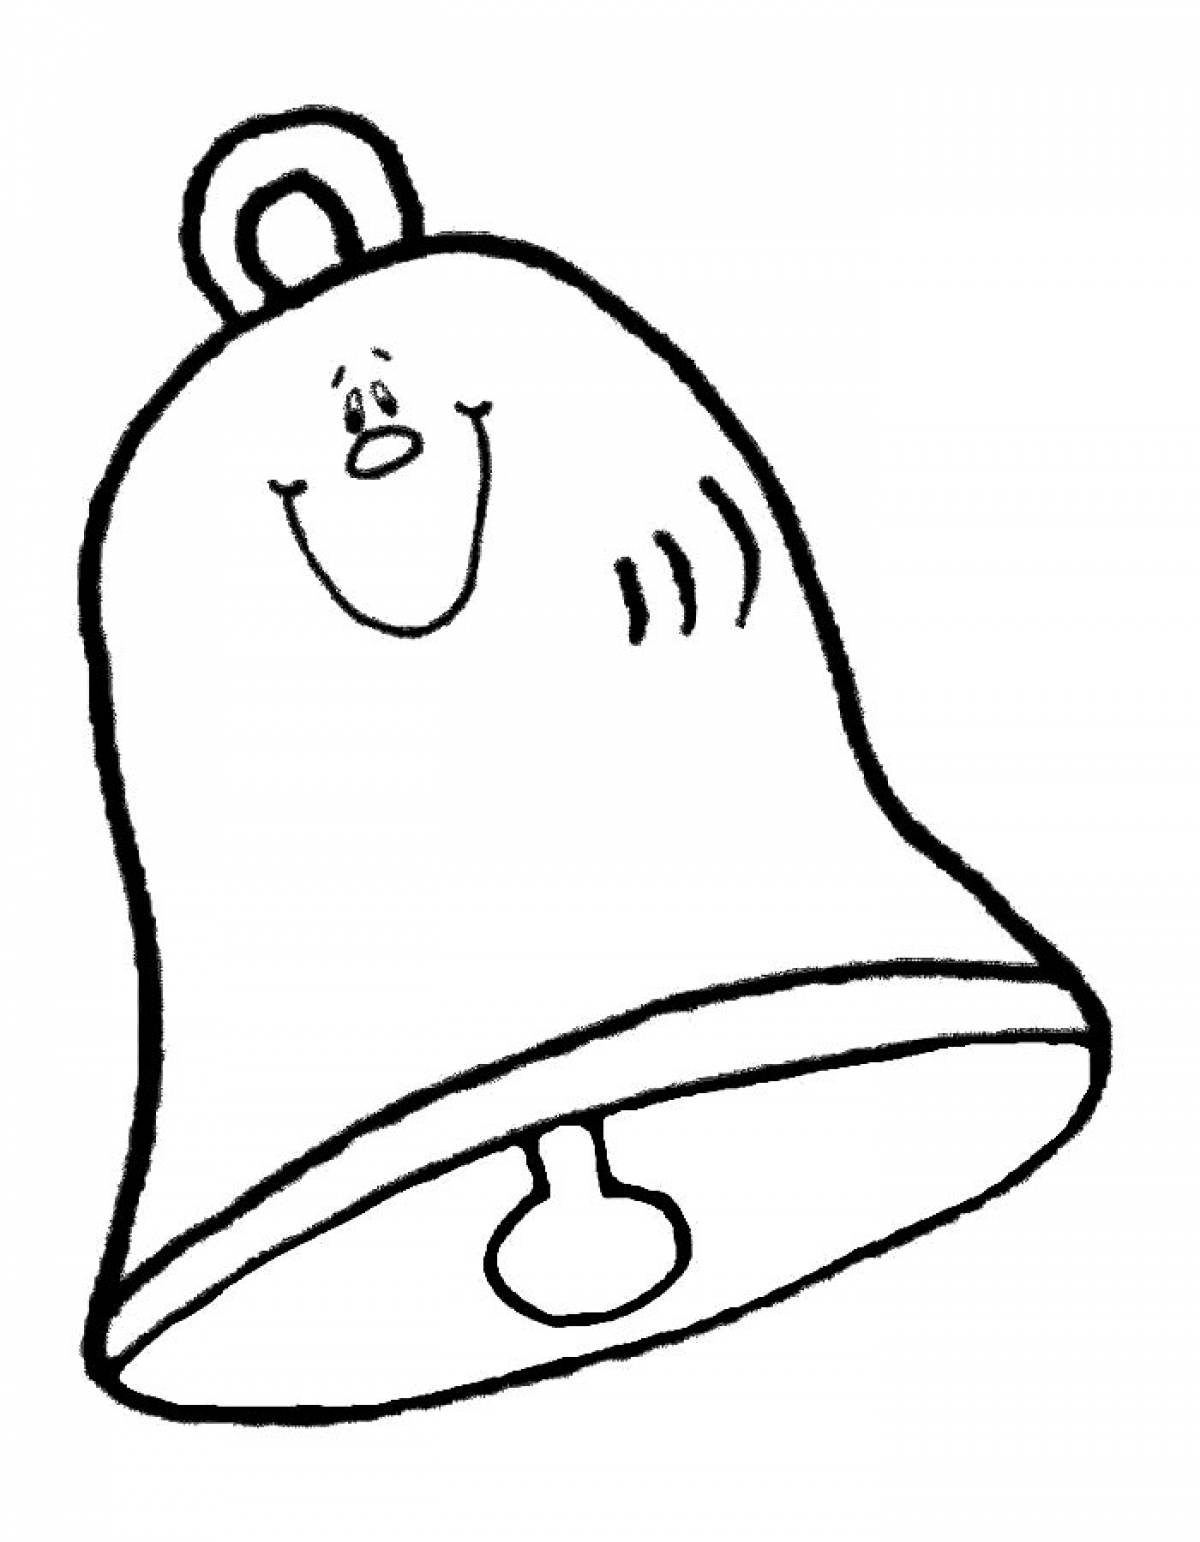 Bell with eyes